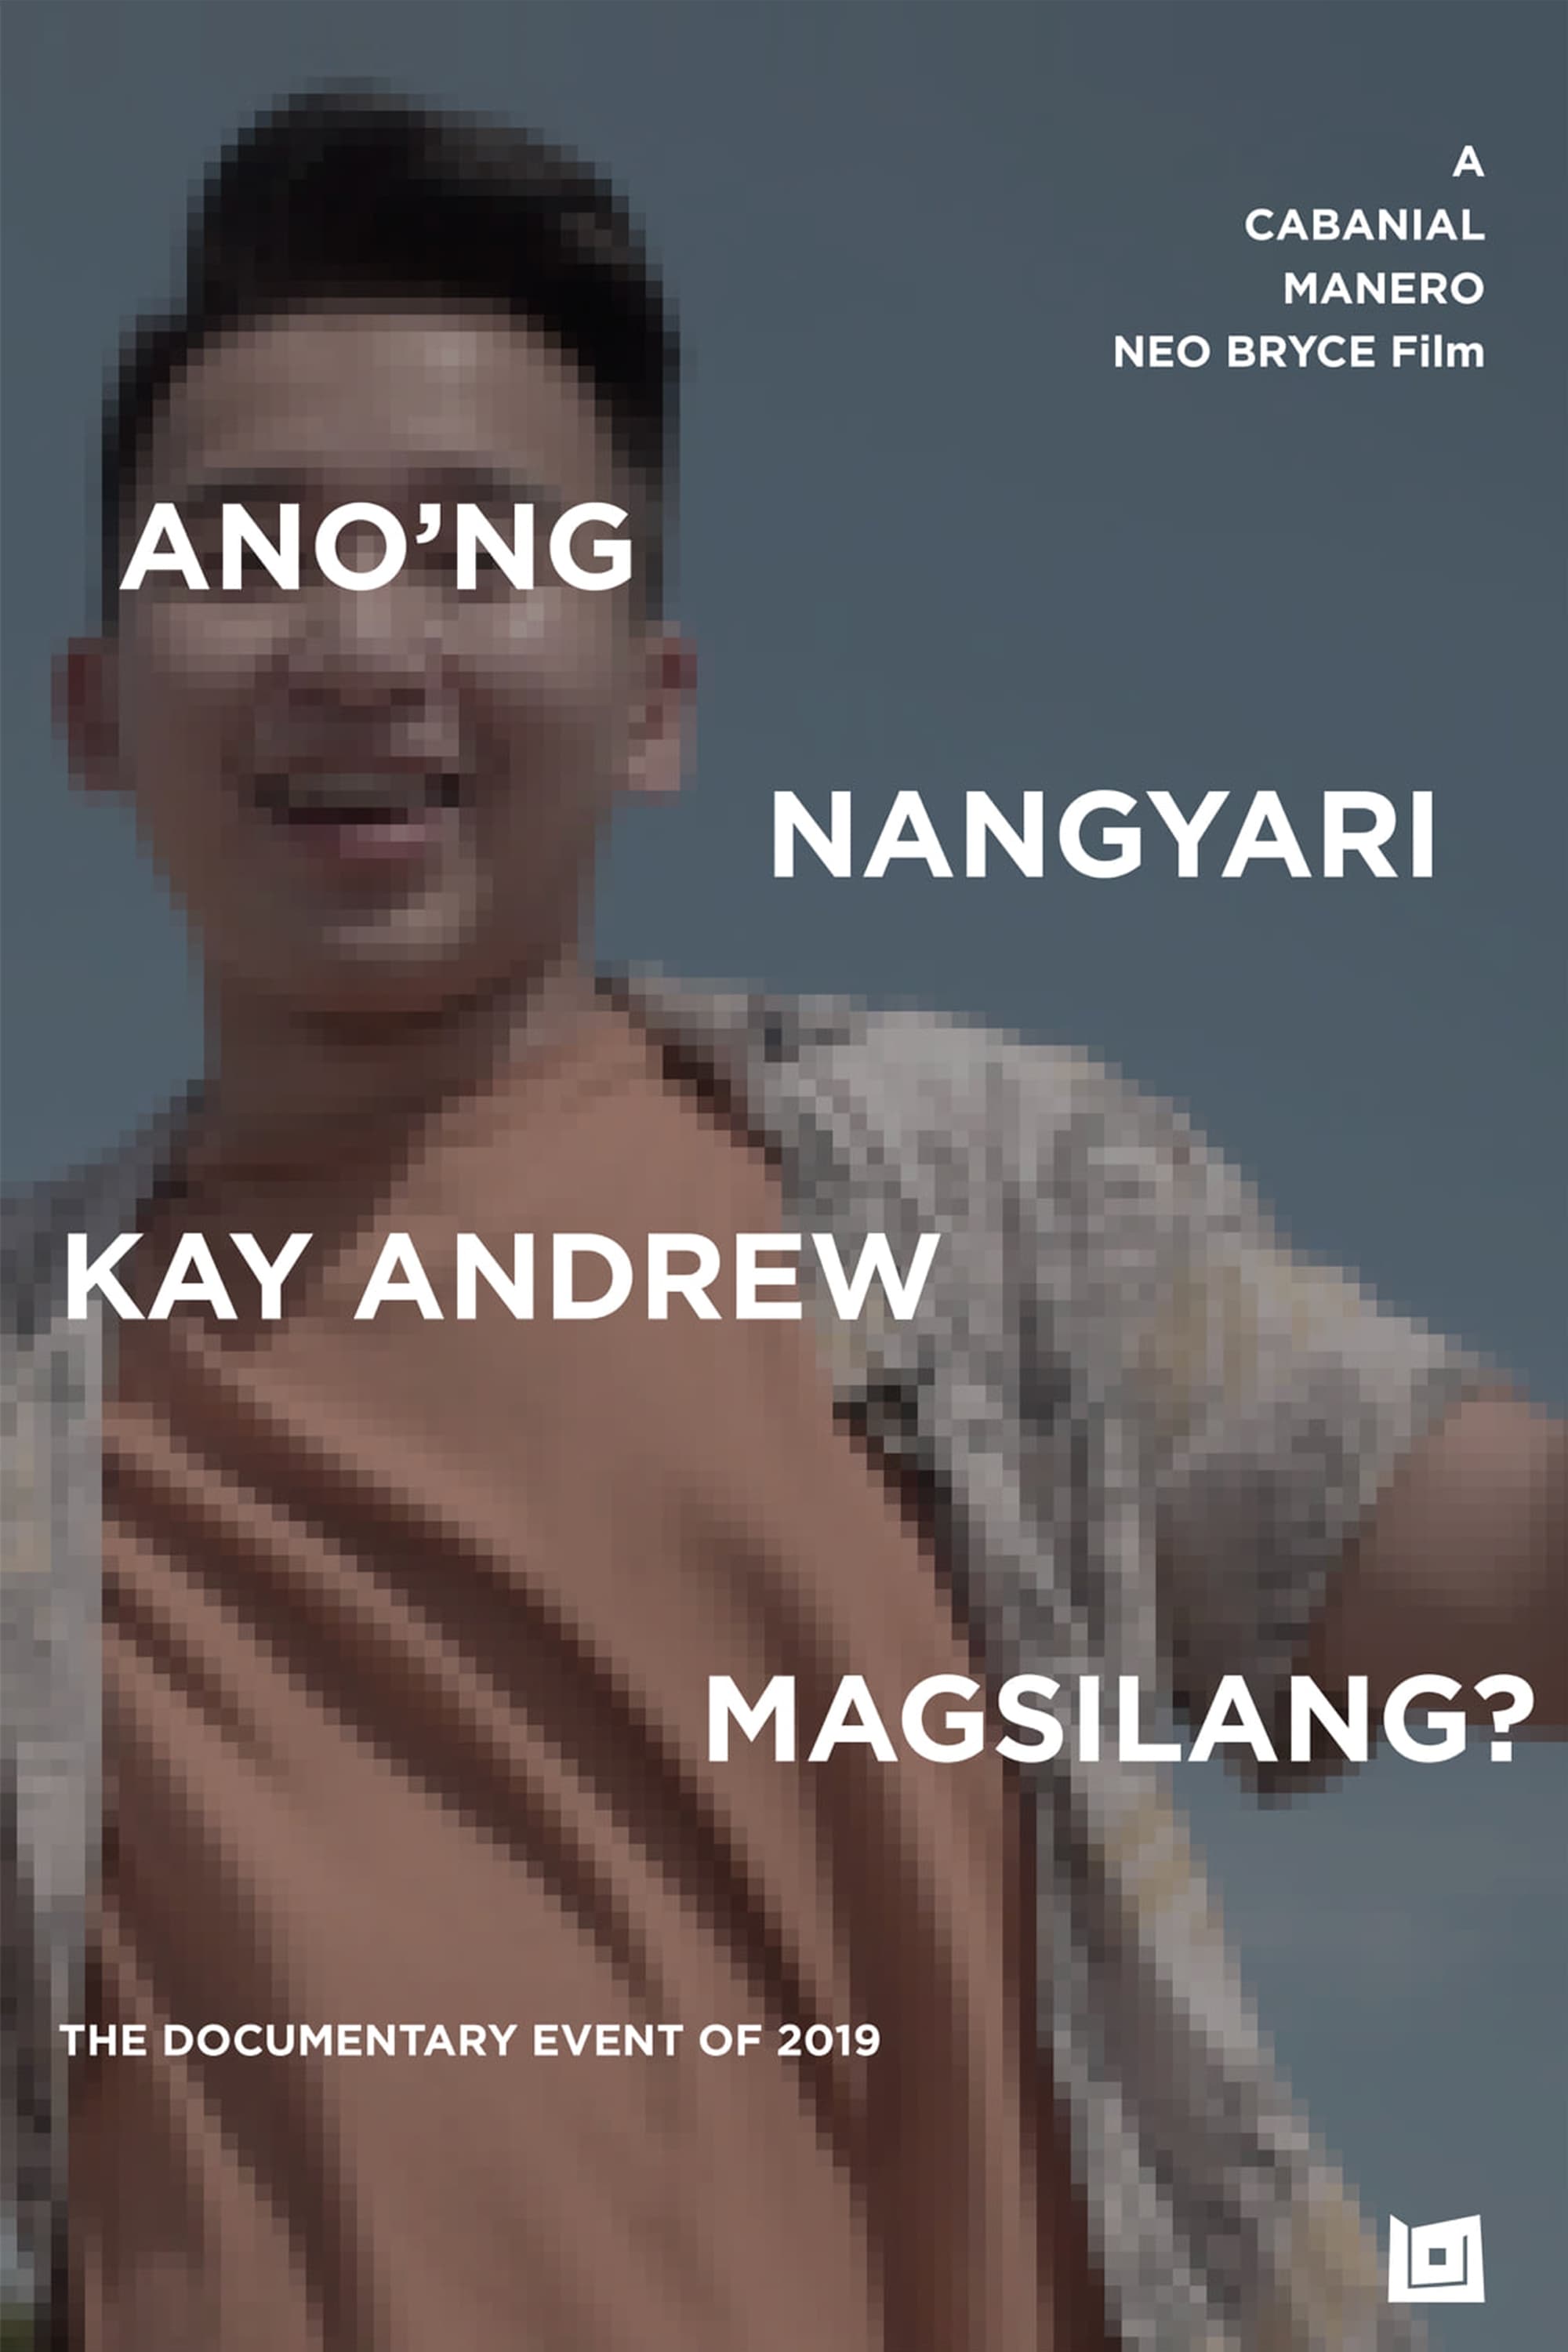 What Happened to Andrew Magsilang?